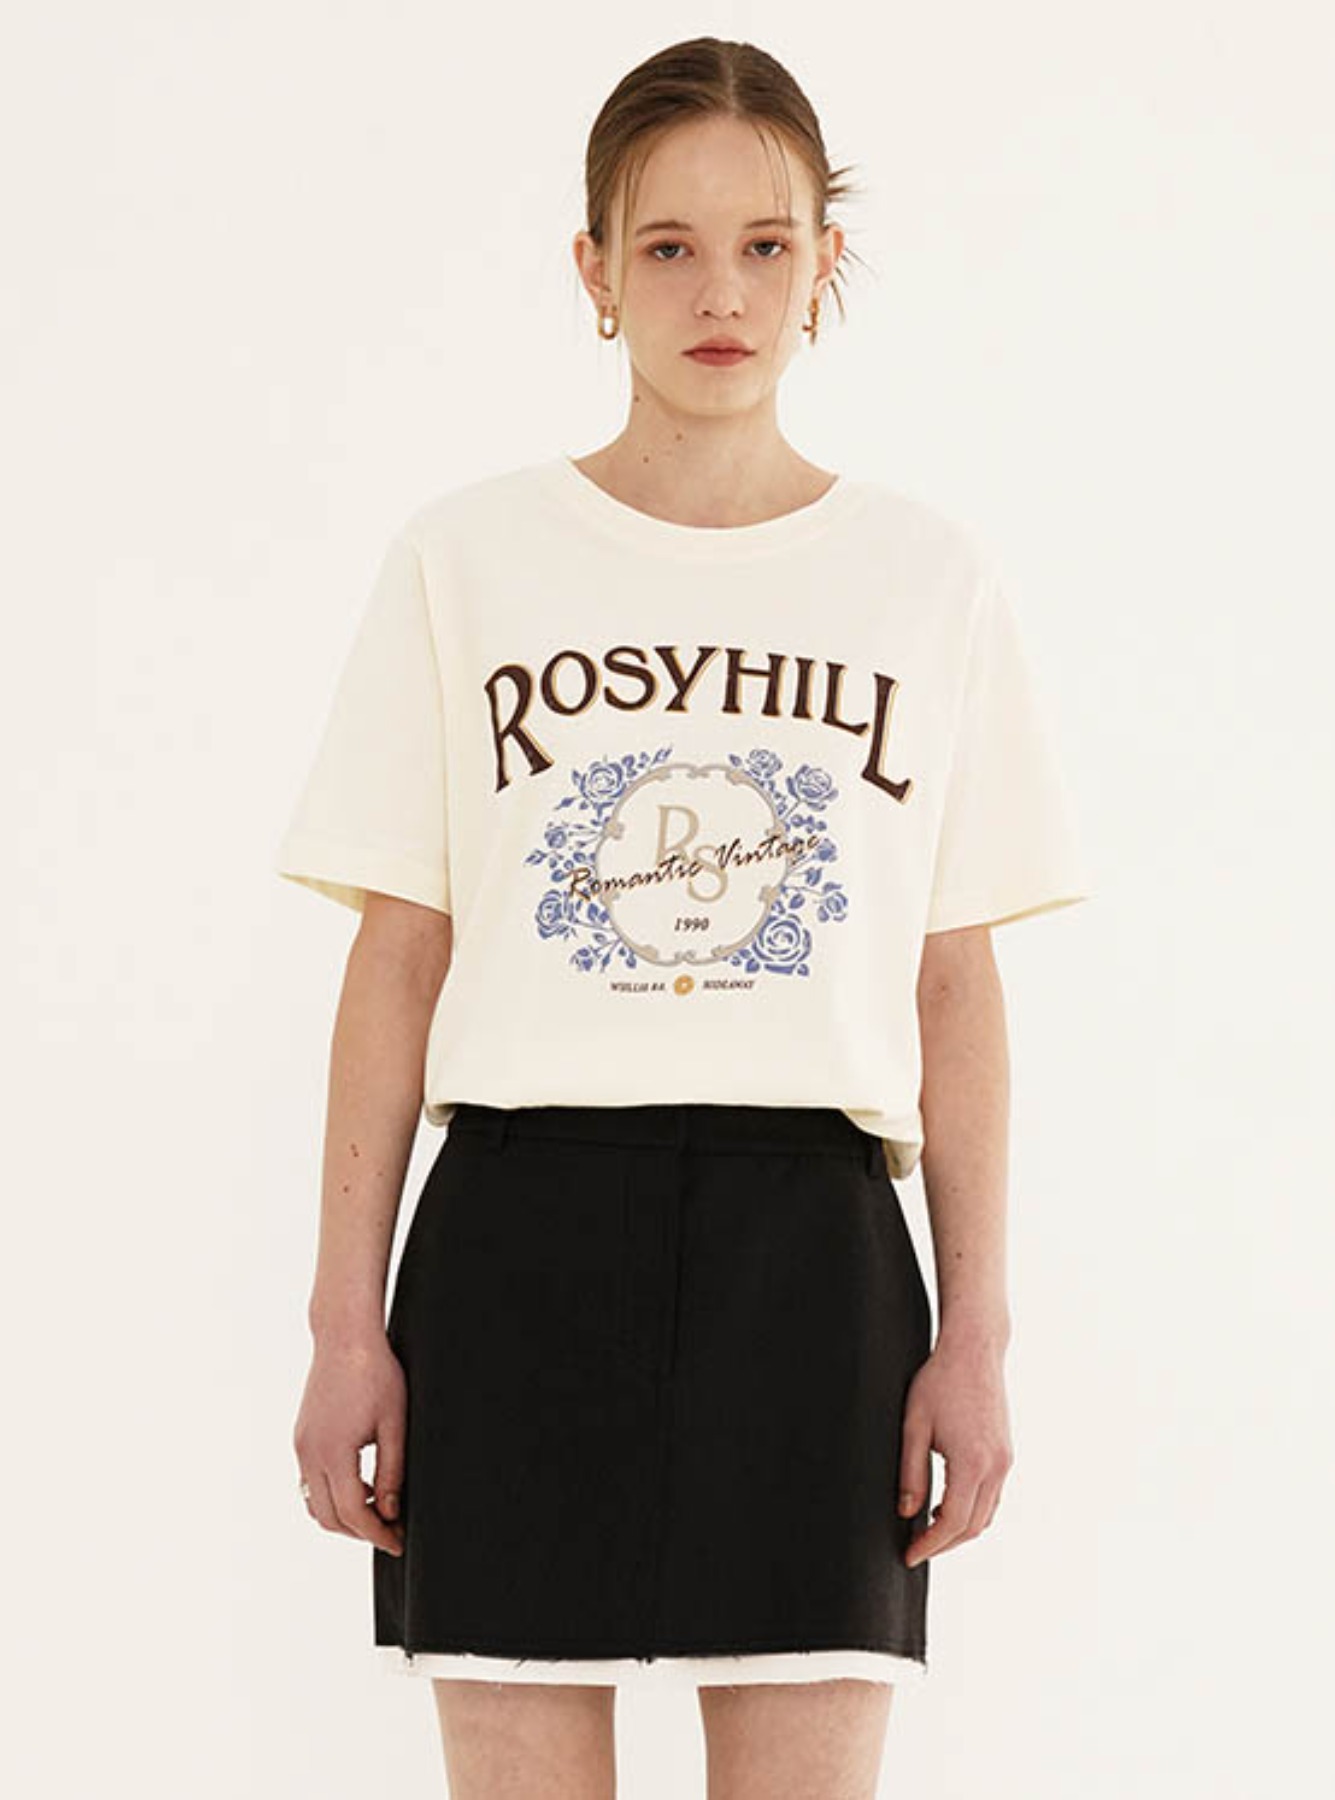 ROSYHILL T-shirt in Cream VW2ME127-9A